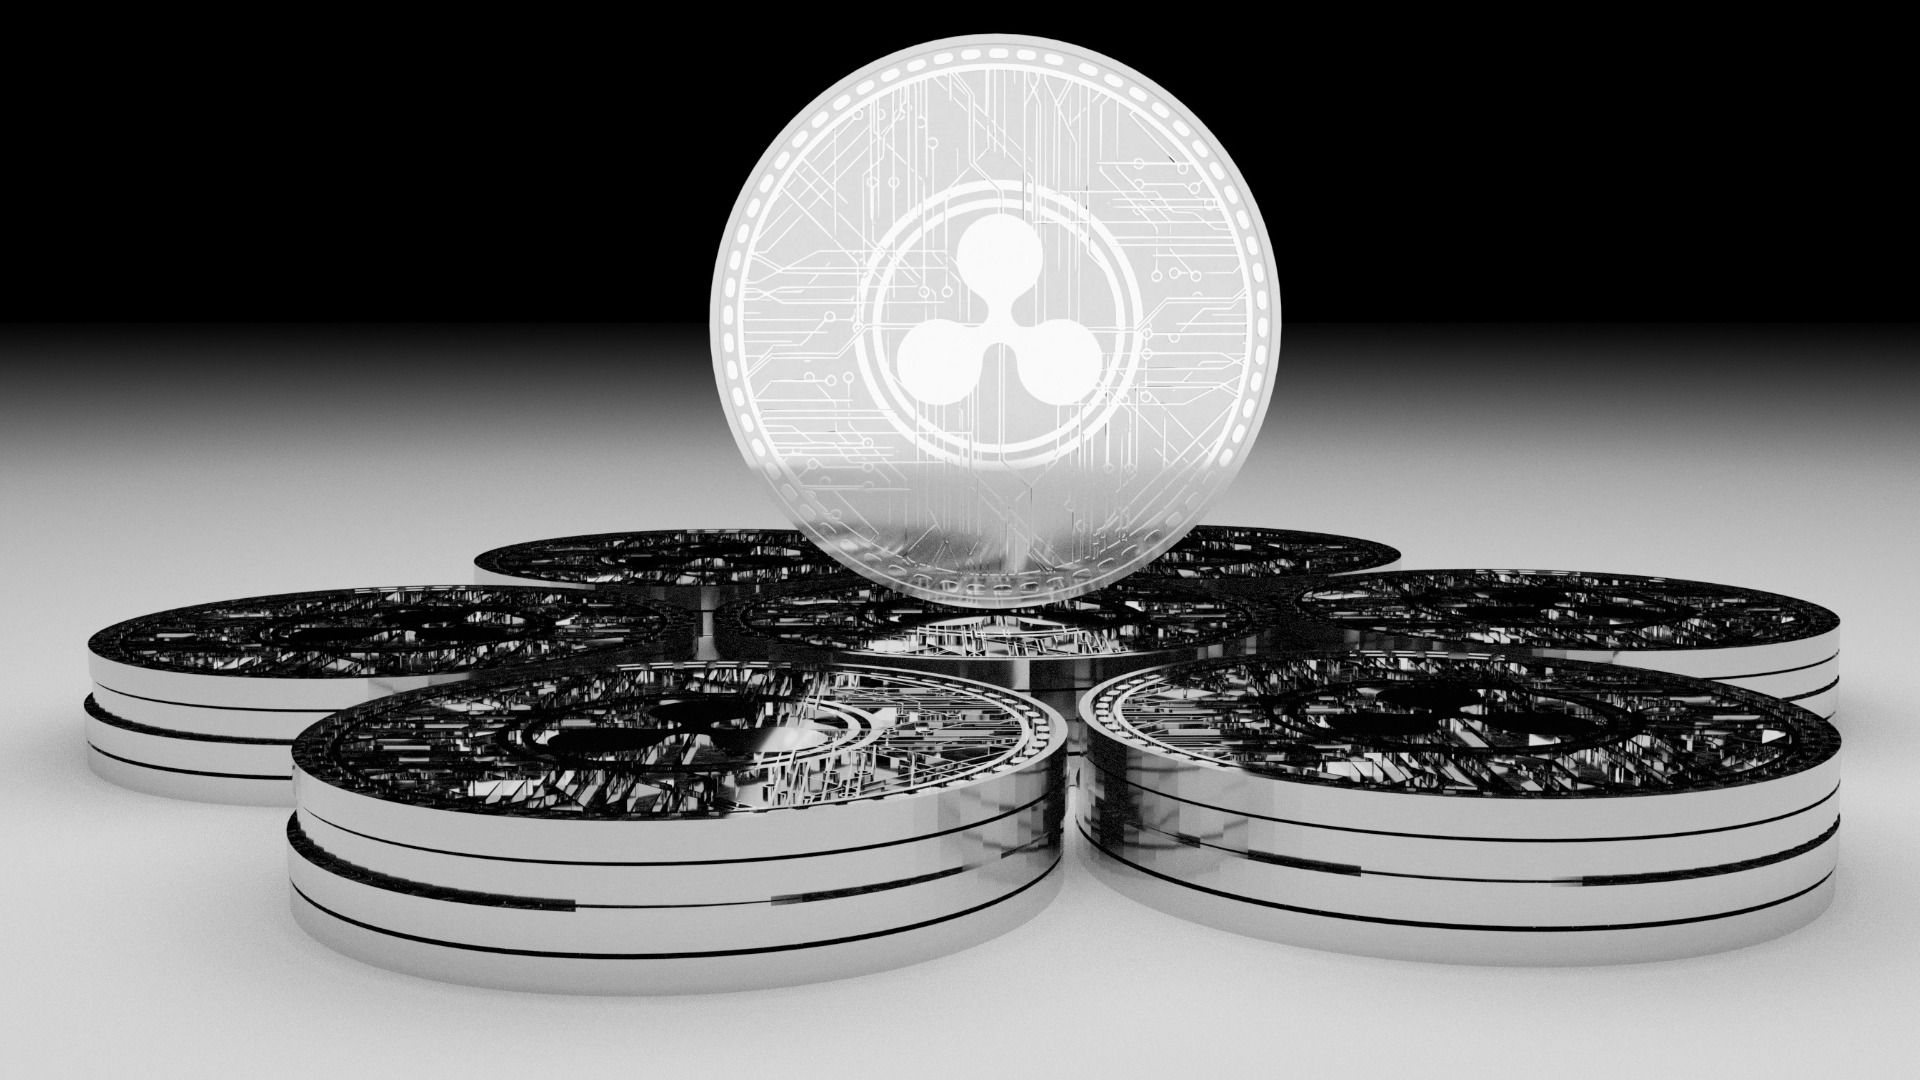 Ethereum, Litecoin, and Ripple's XRP – Daily Tech Analysis – June 16th, 2021